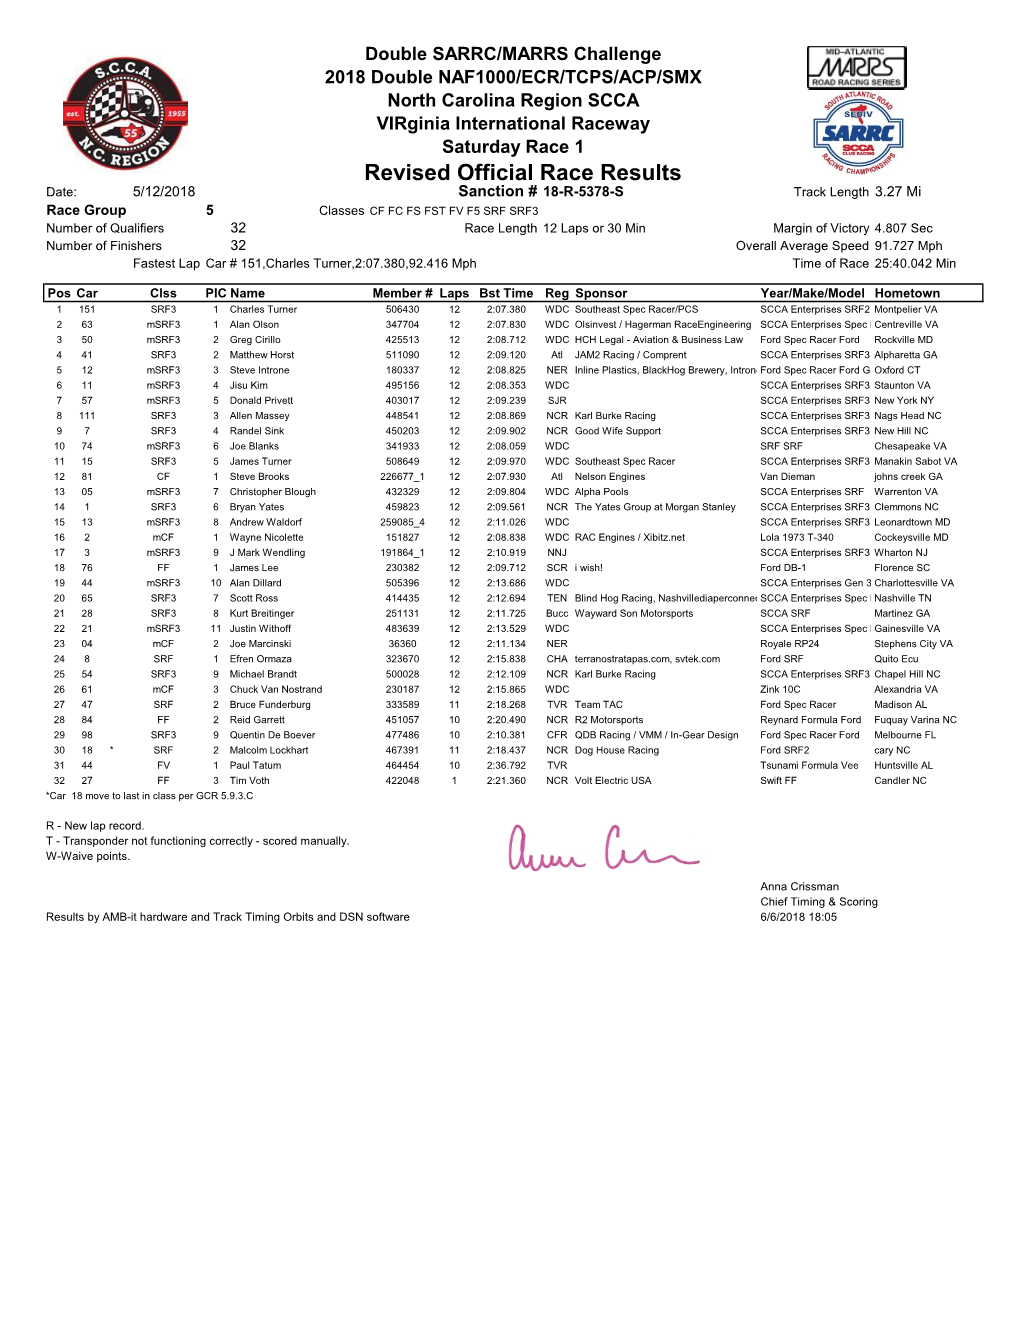 Revised Official Race Results